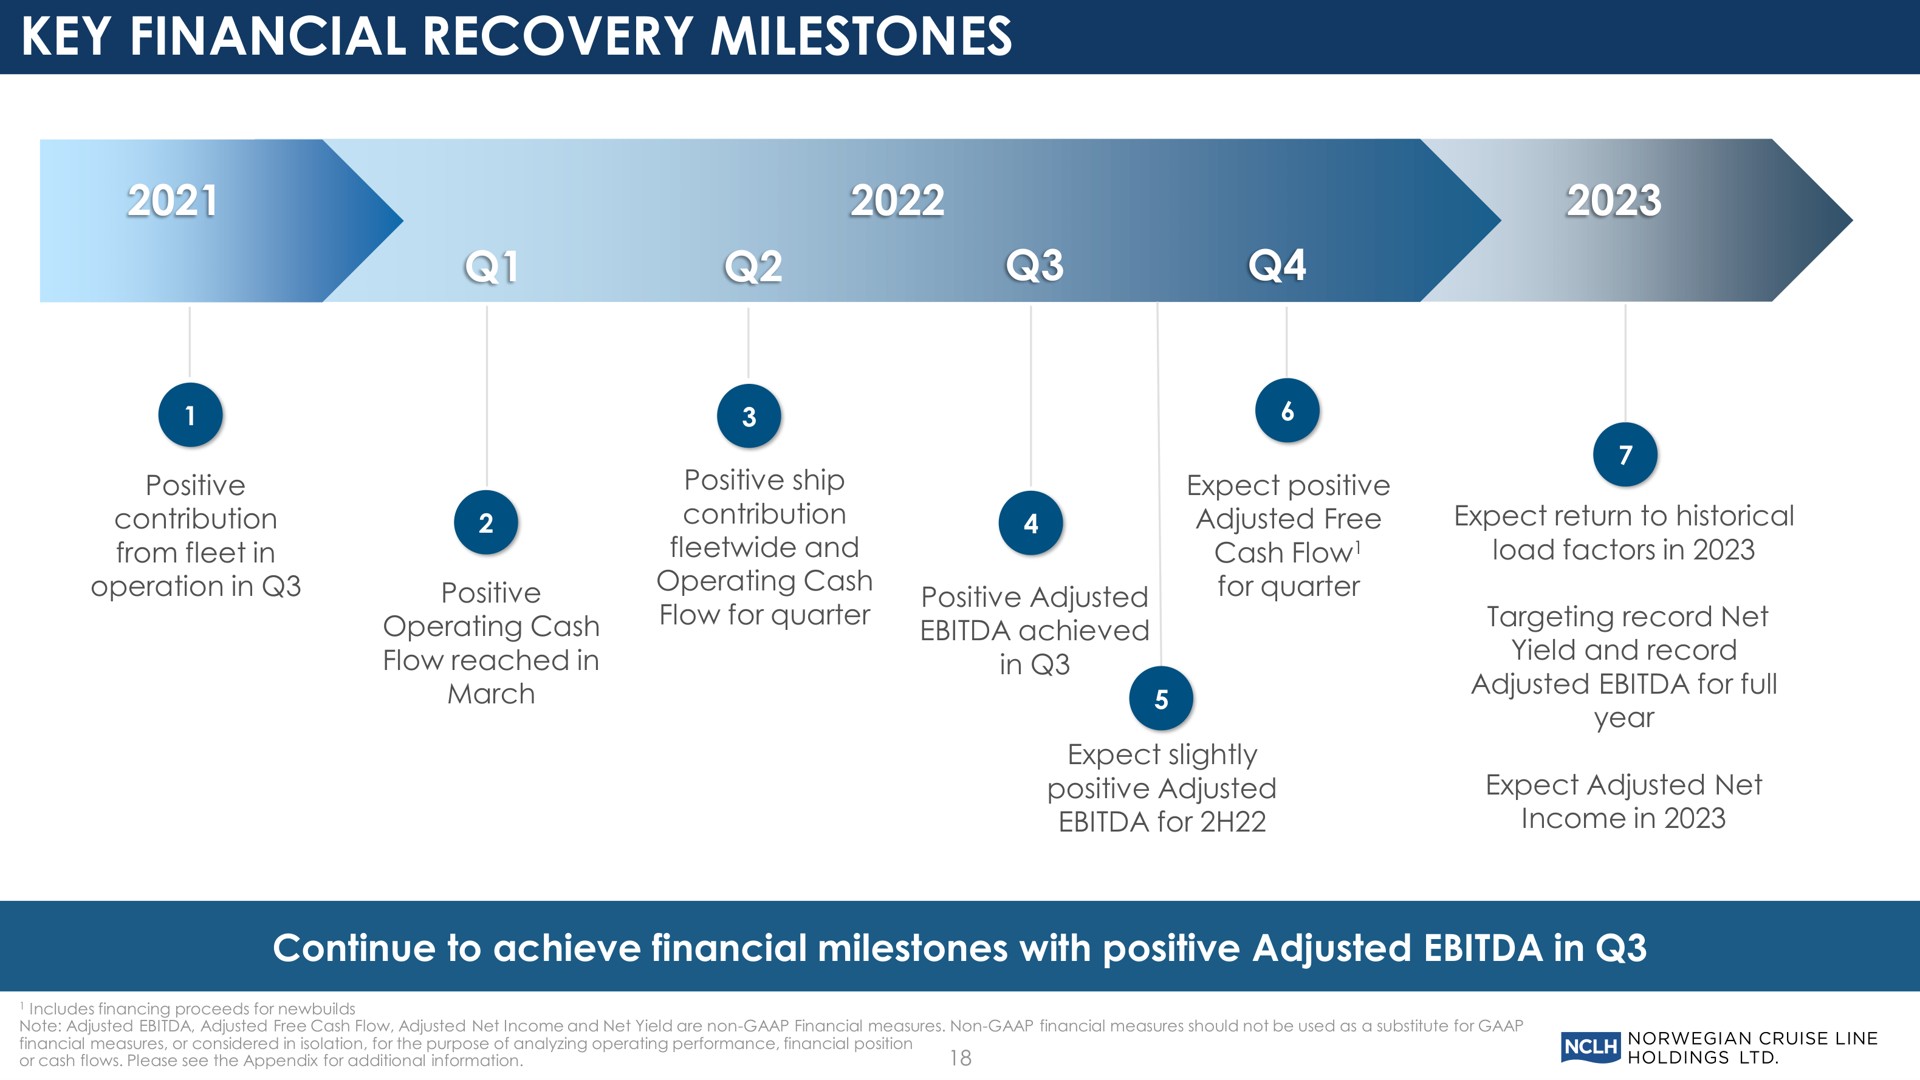 key financial recovery milestones continue to achieve financial milestones with positive adjusted in | Norwegian Cruise Line